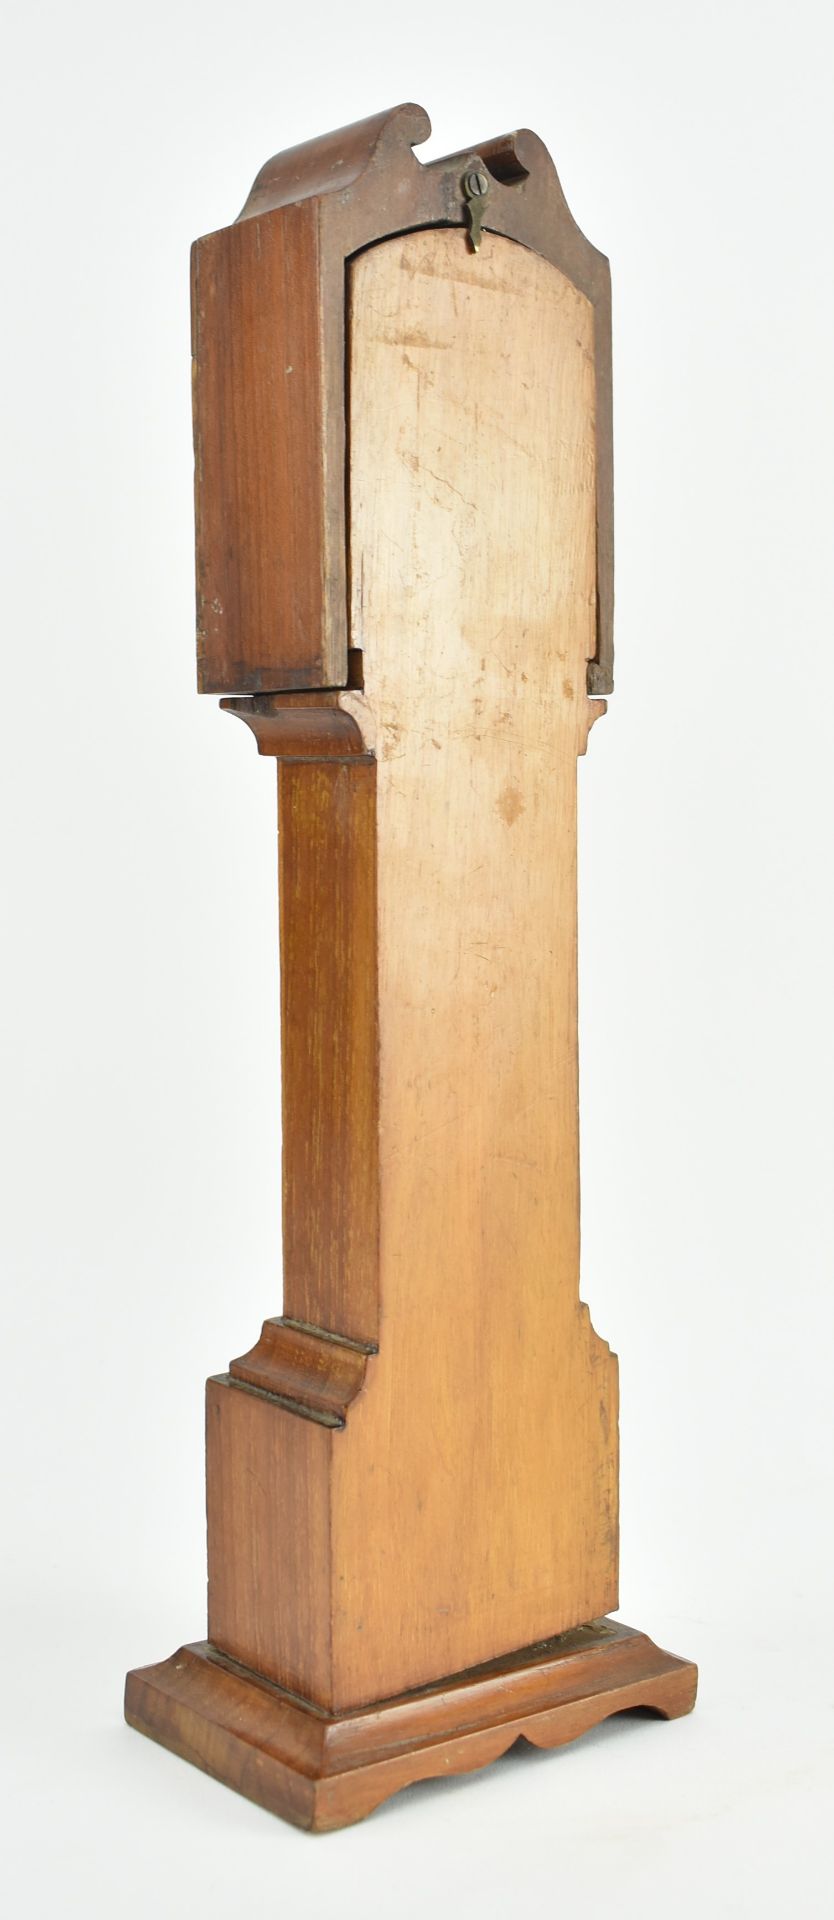 POCKET WATCH HOLDER IN FORM OF GRANDFATHER CLOCK - Image 9 of 9